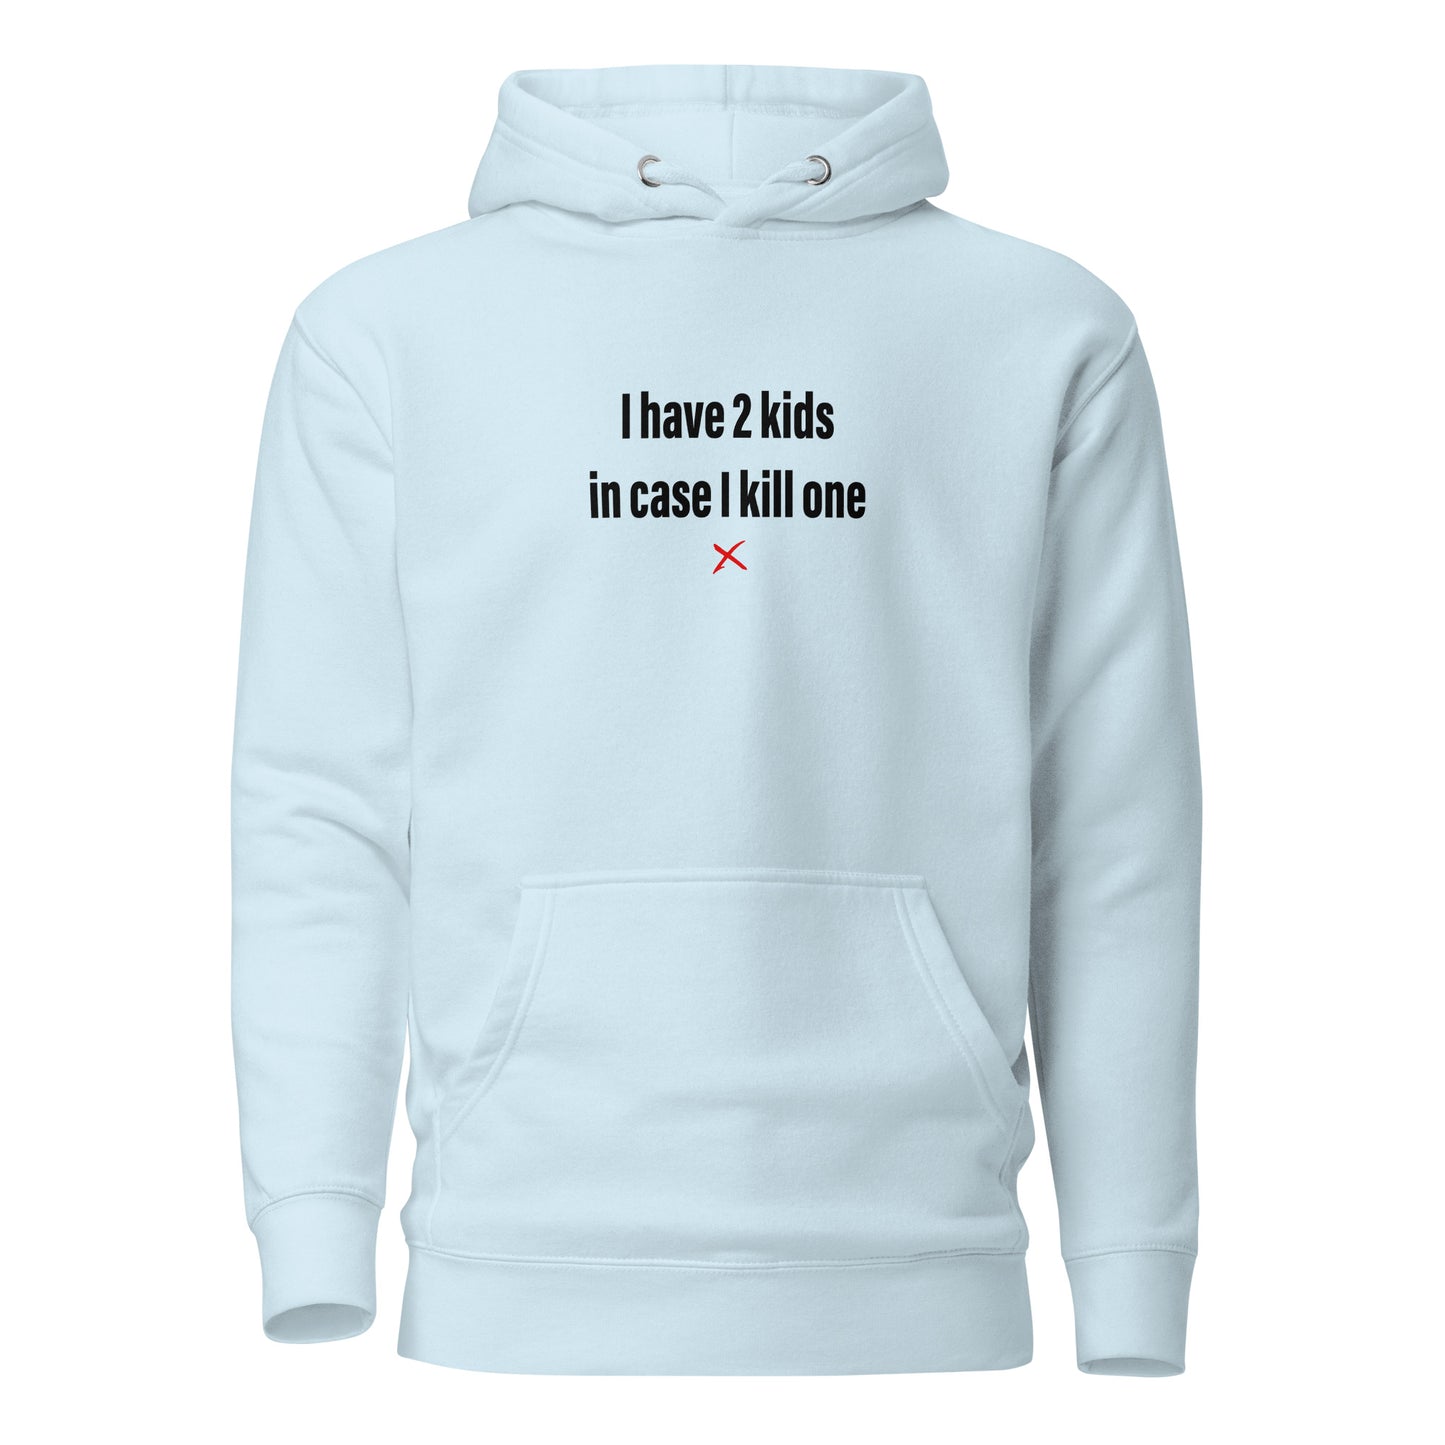 I have 2 kids in case I kill one - Hoodie